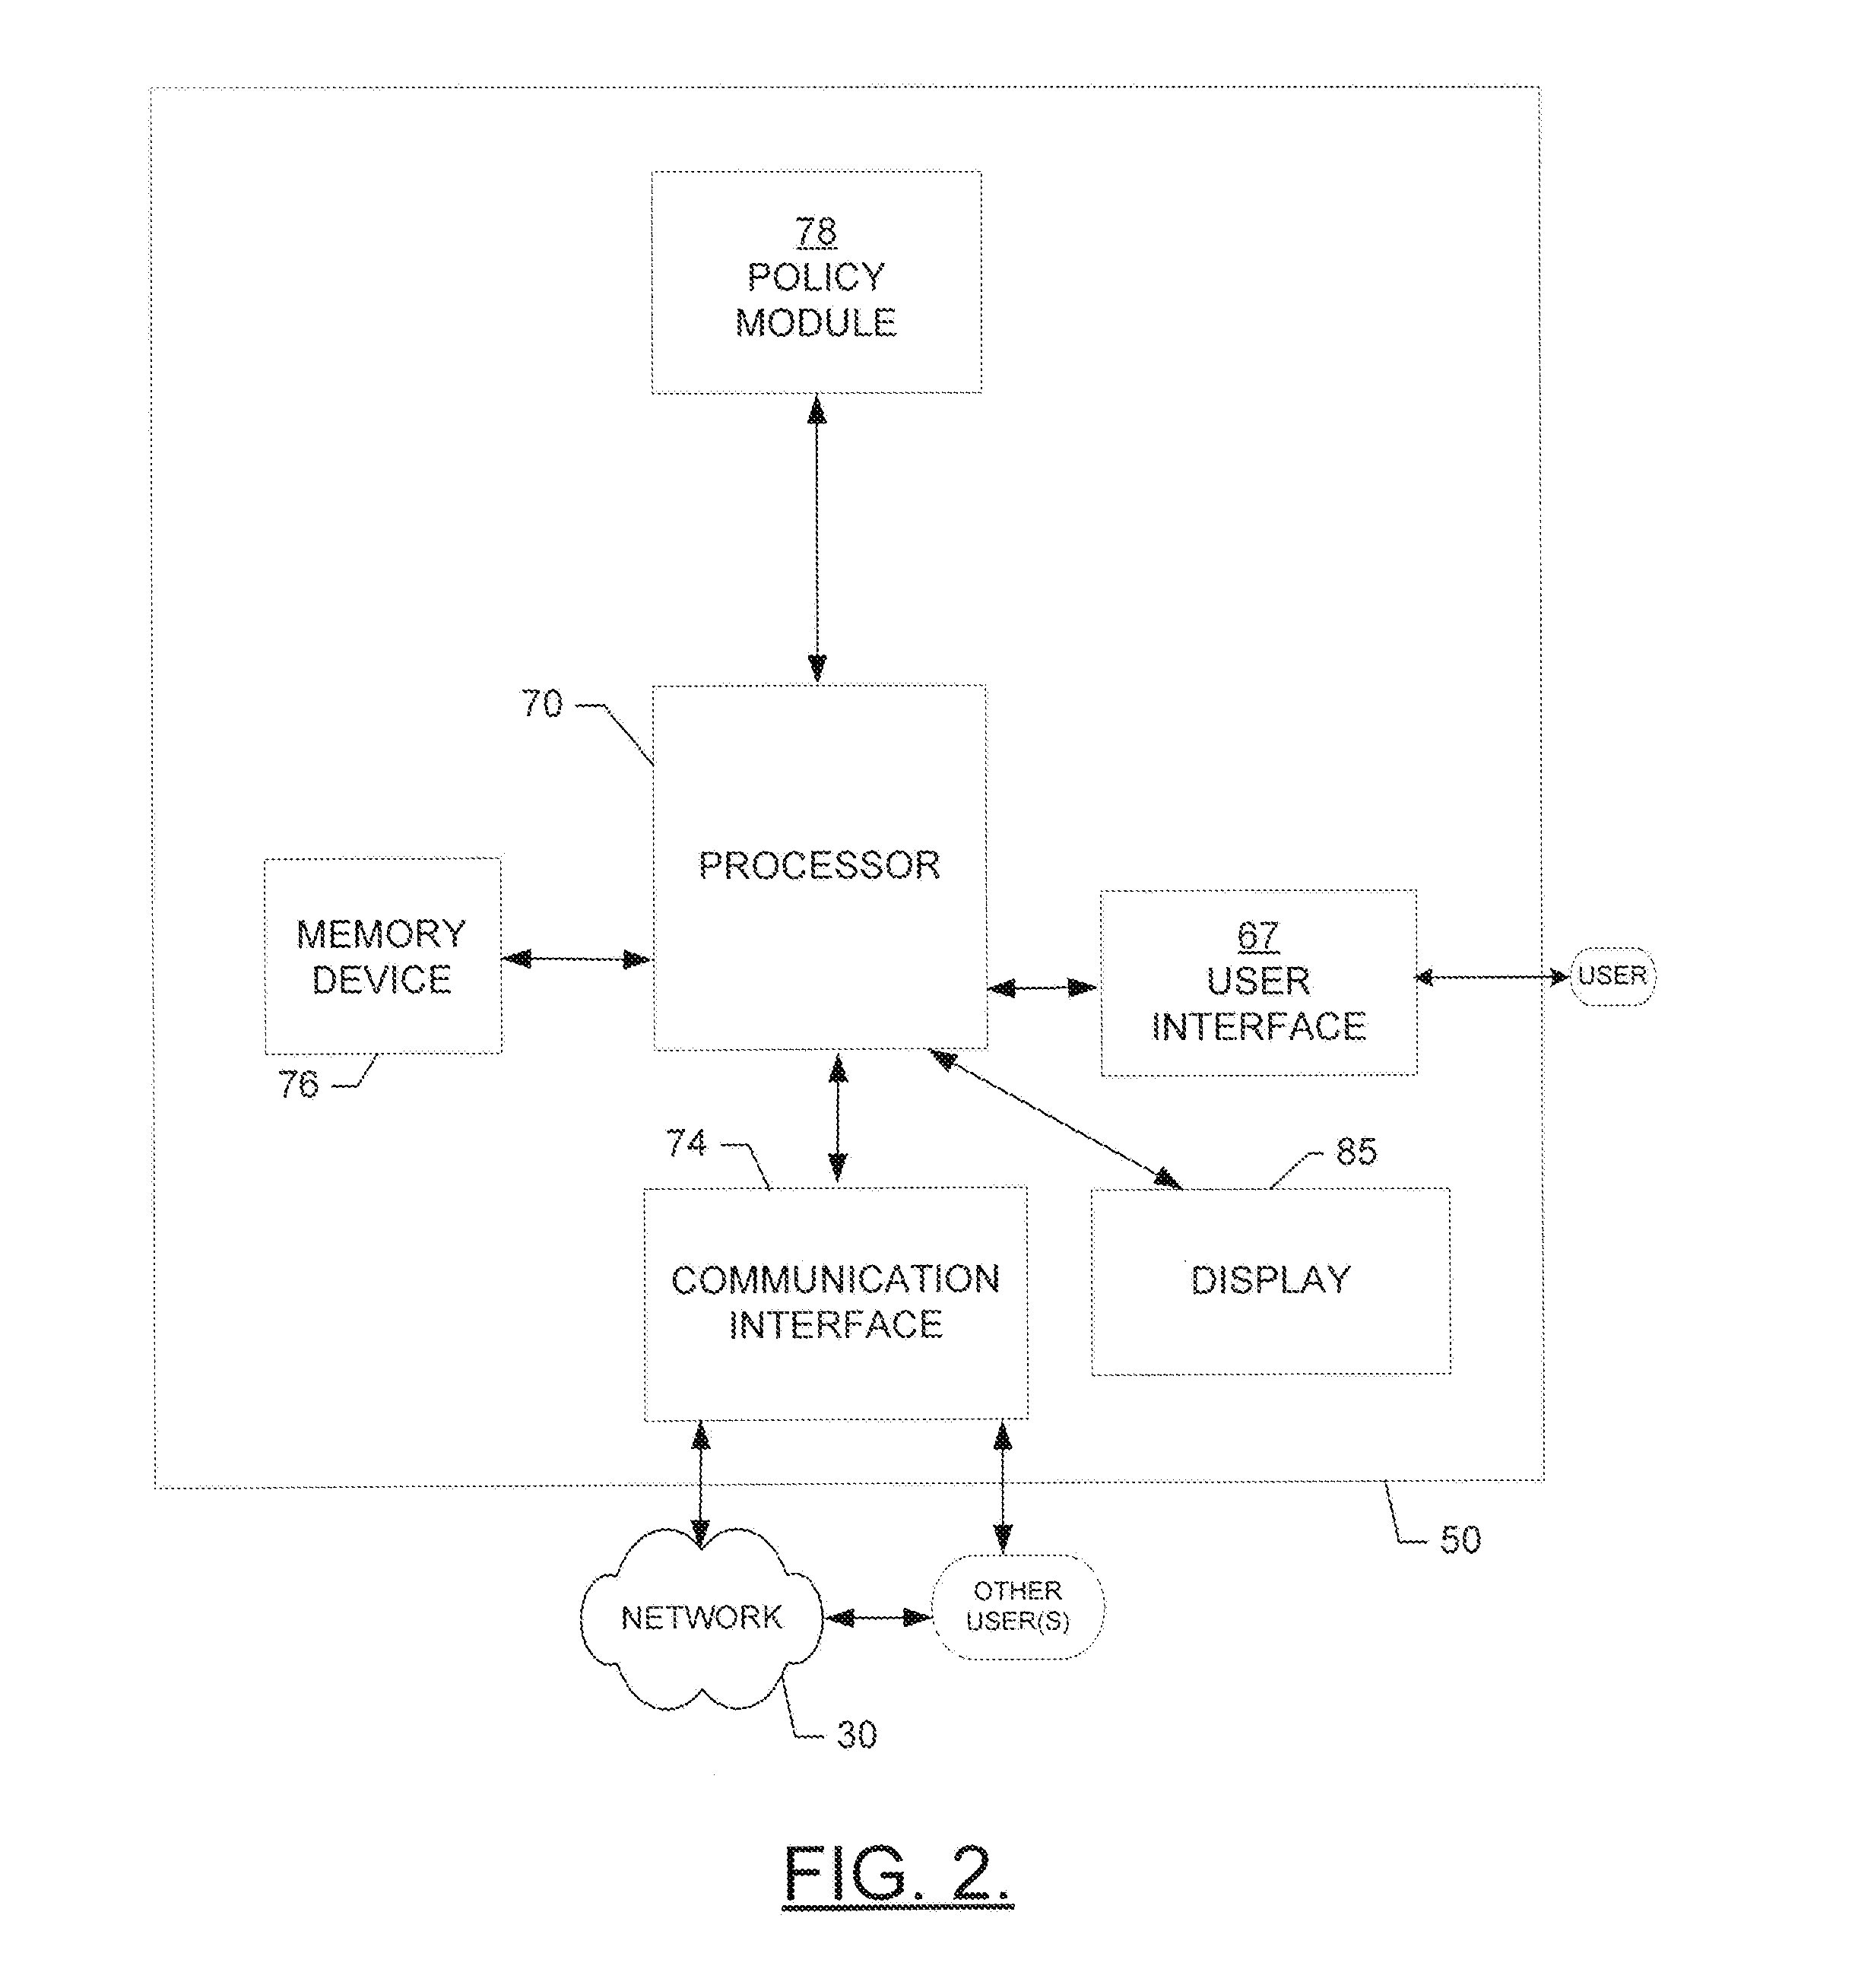 Method for managing device behavior during increased load or congestion using policies